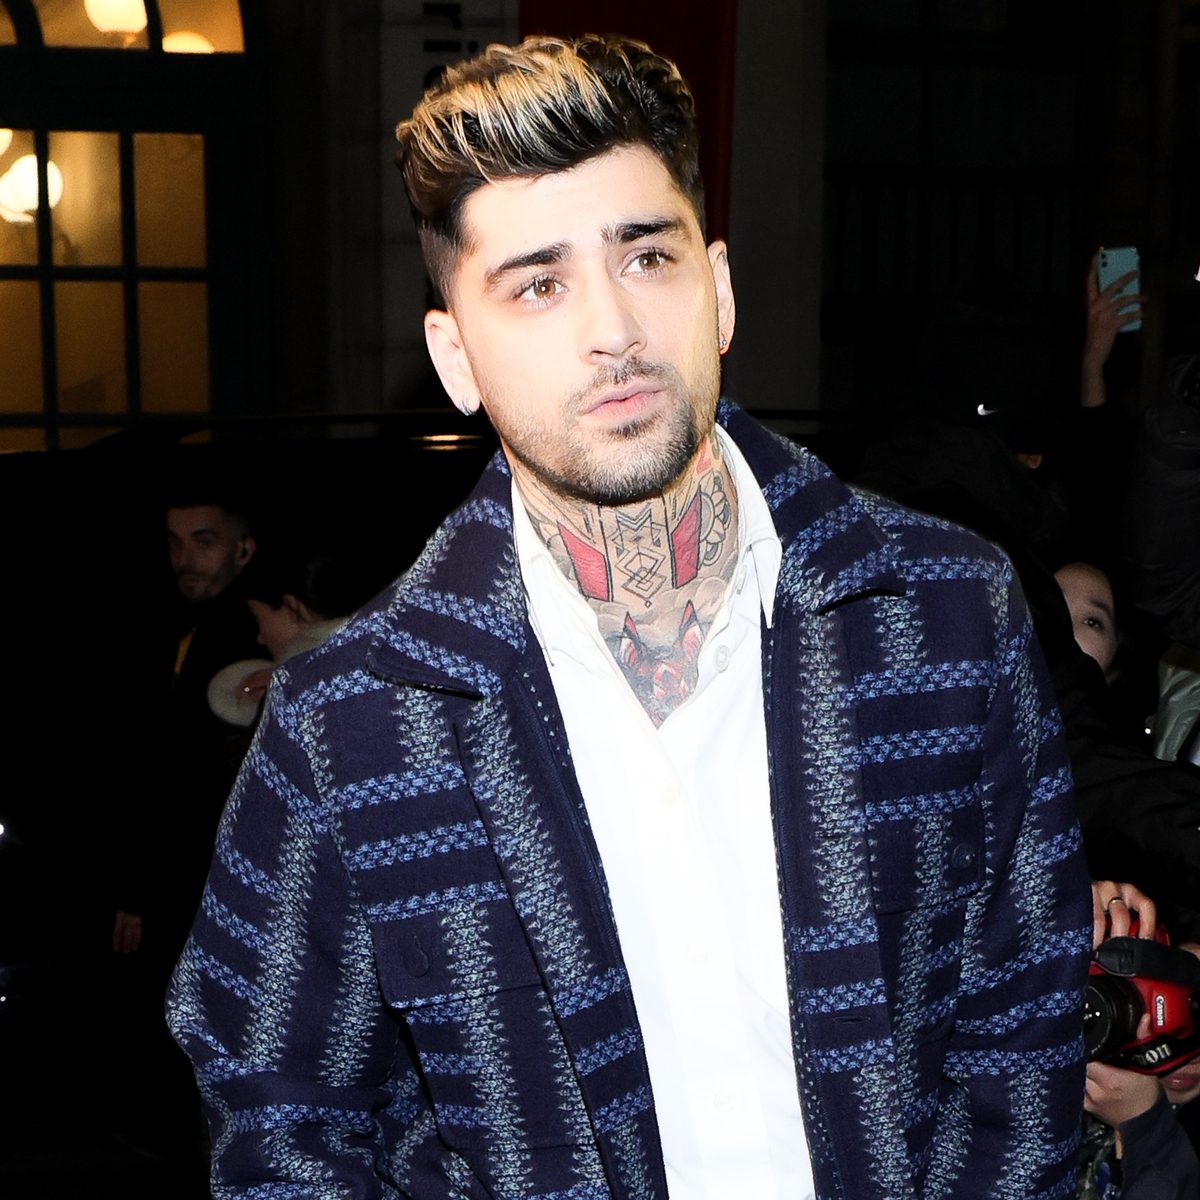 Zayn Maliks Foot Appears To Get Run Over By Car During Rare Public Appearance E Online E News